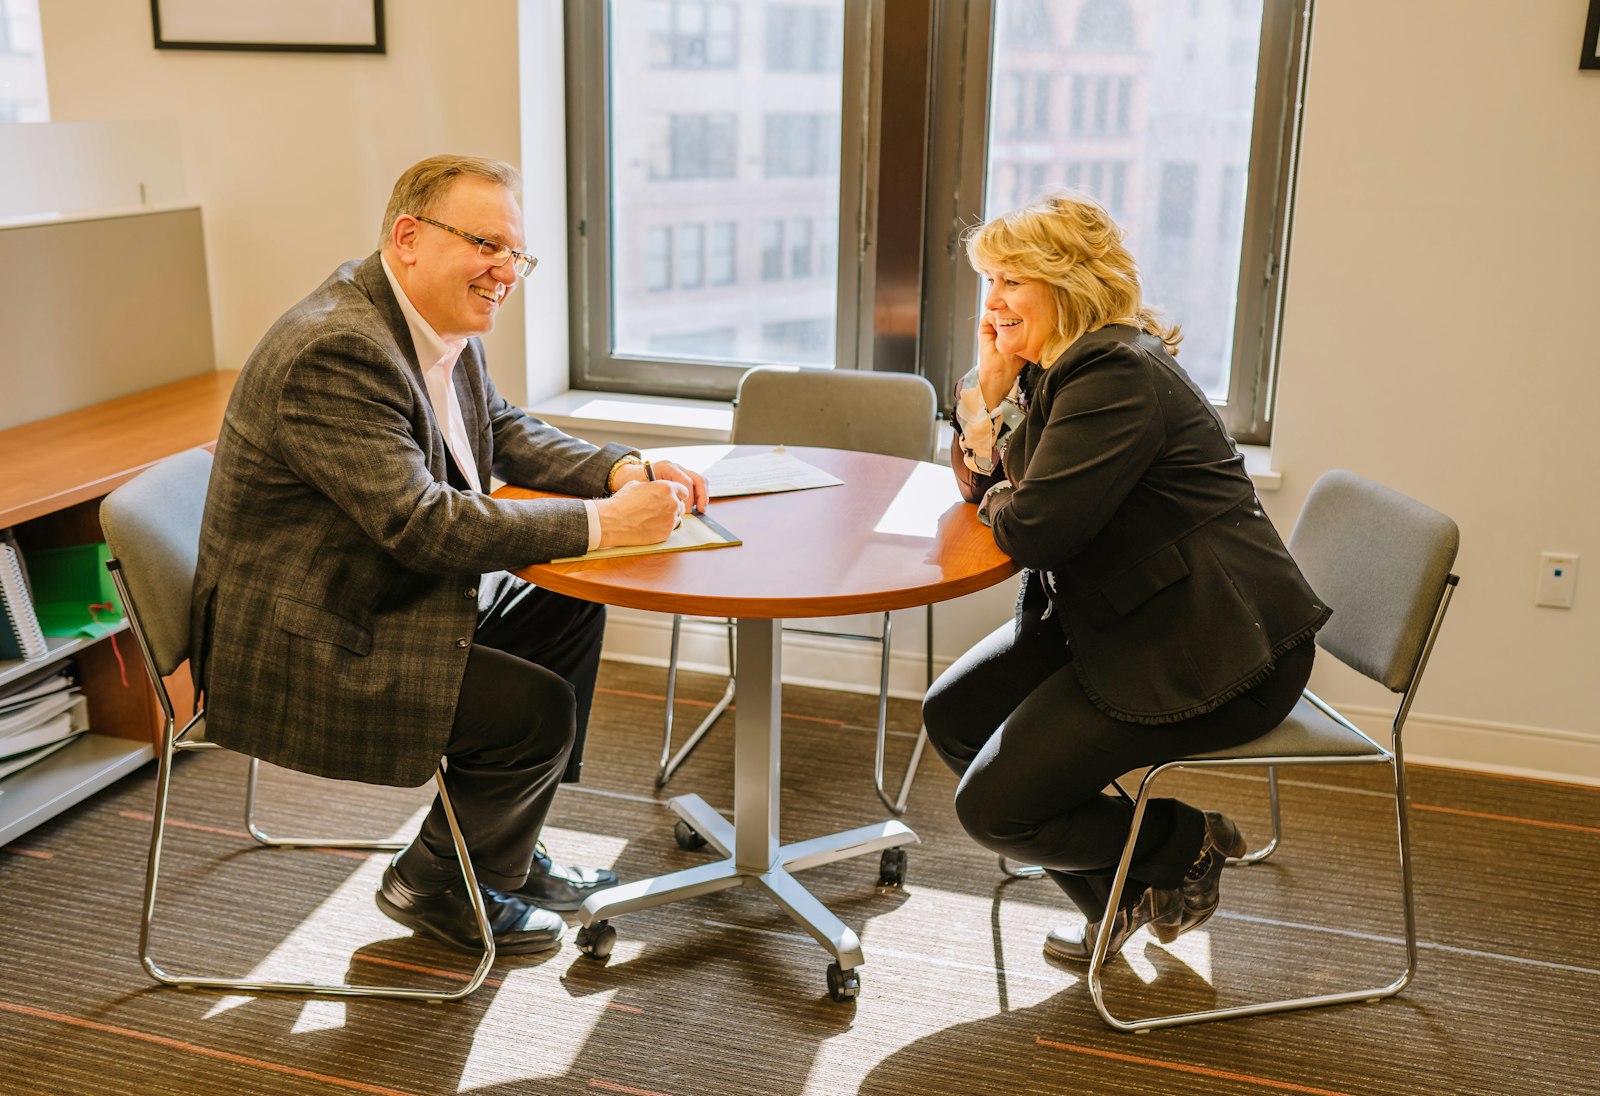 Deacon Michael Houghton, left, and Mary Martin, co-founders of the new apostolate UTG at Work, discuss plans for the ministry at the Archdiocese of Detroit's Chancery building in downtown Detroit in June. (Valaurian Waller | Detroit Catholic)